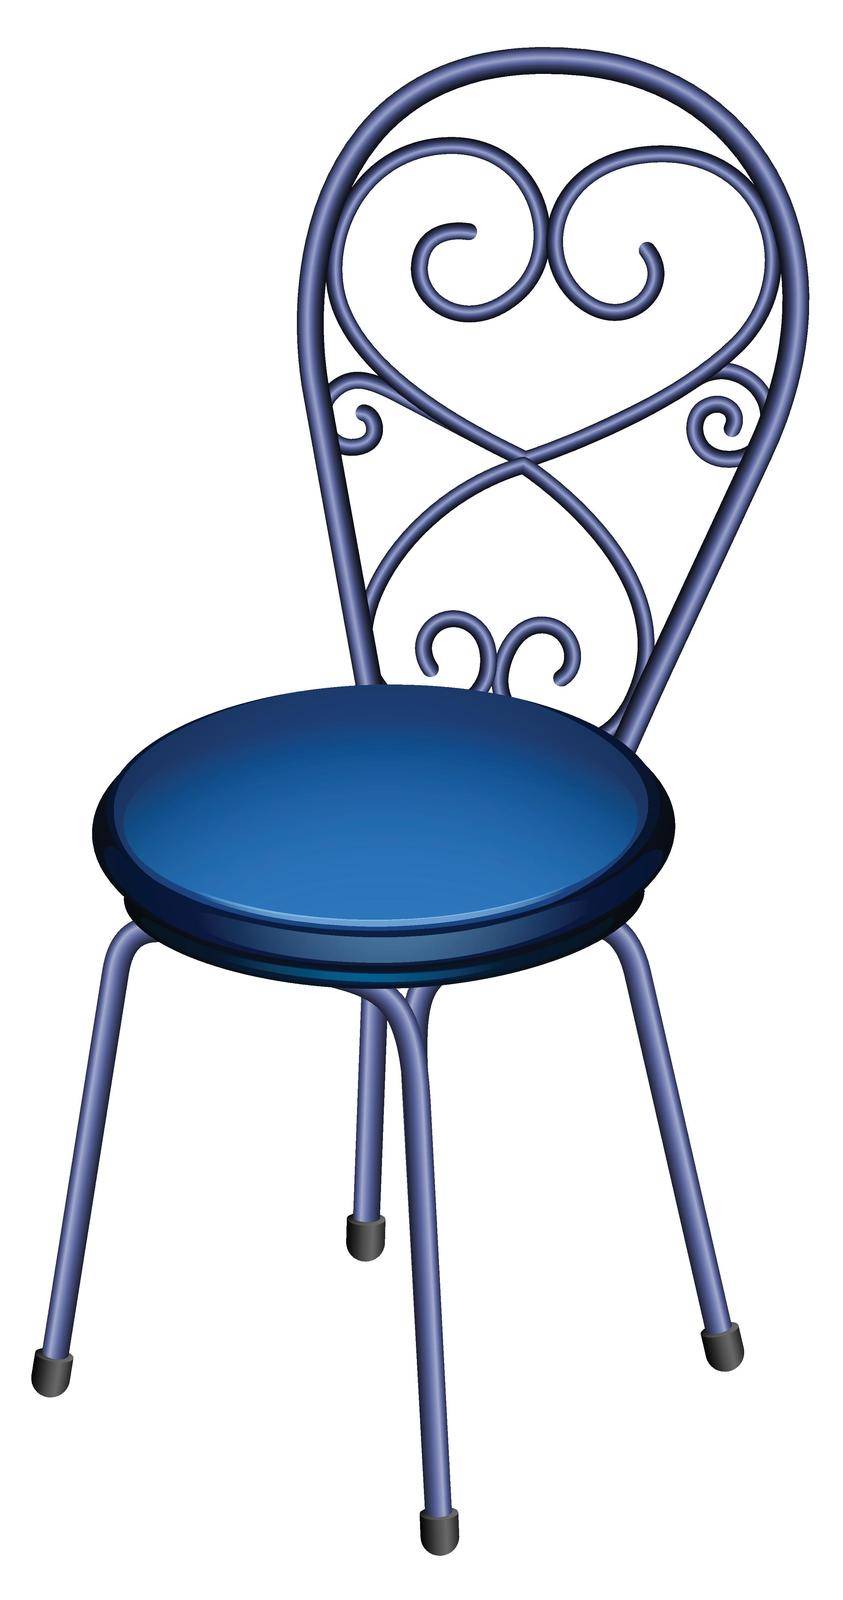 Illustration of a blue chair furniture on a white background